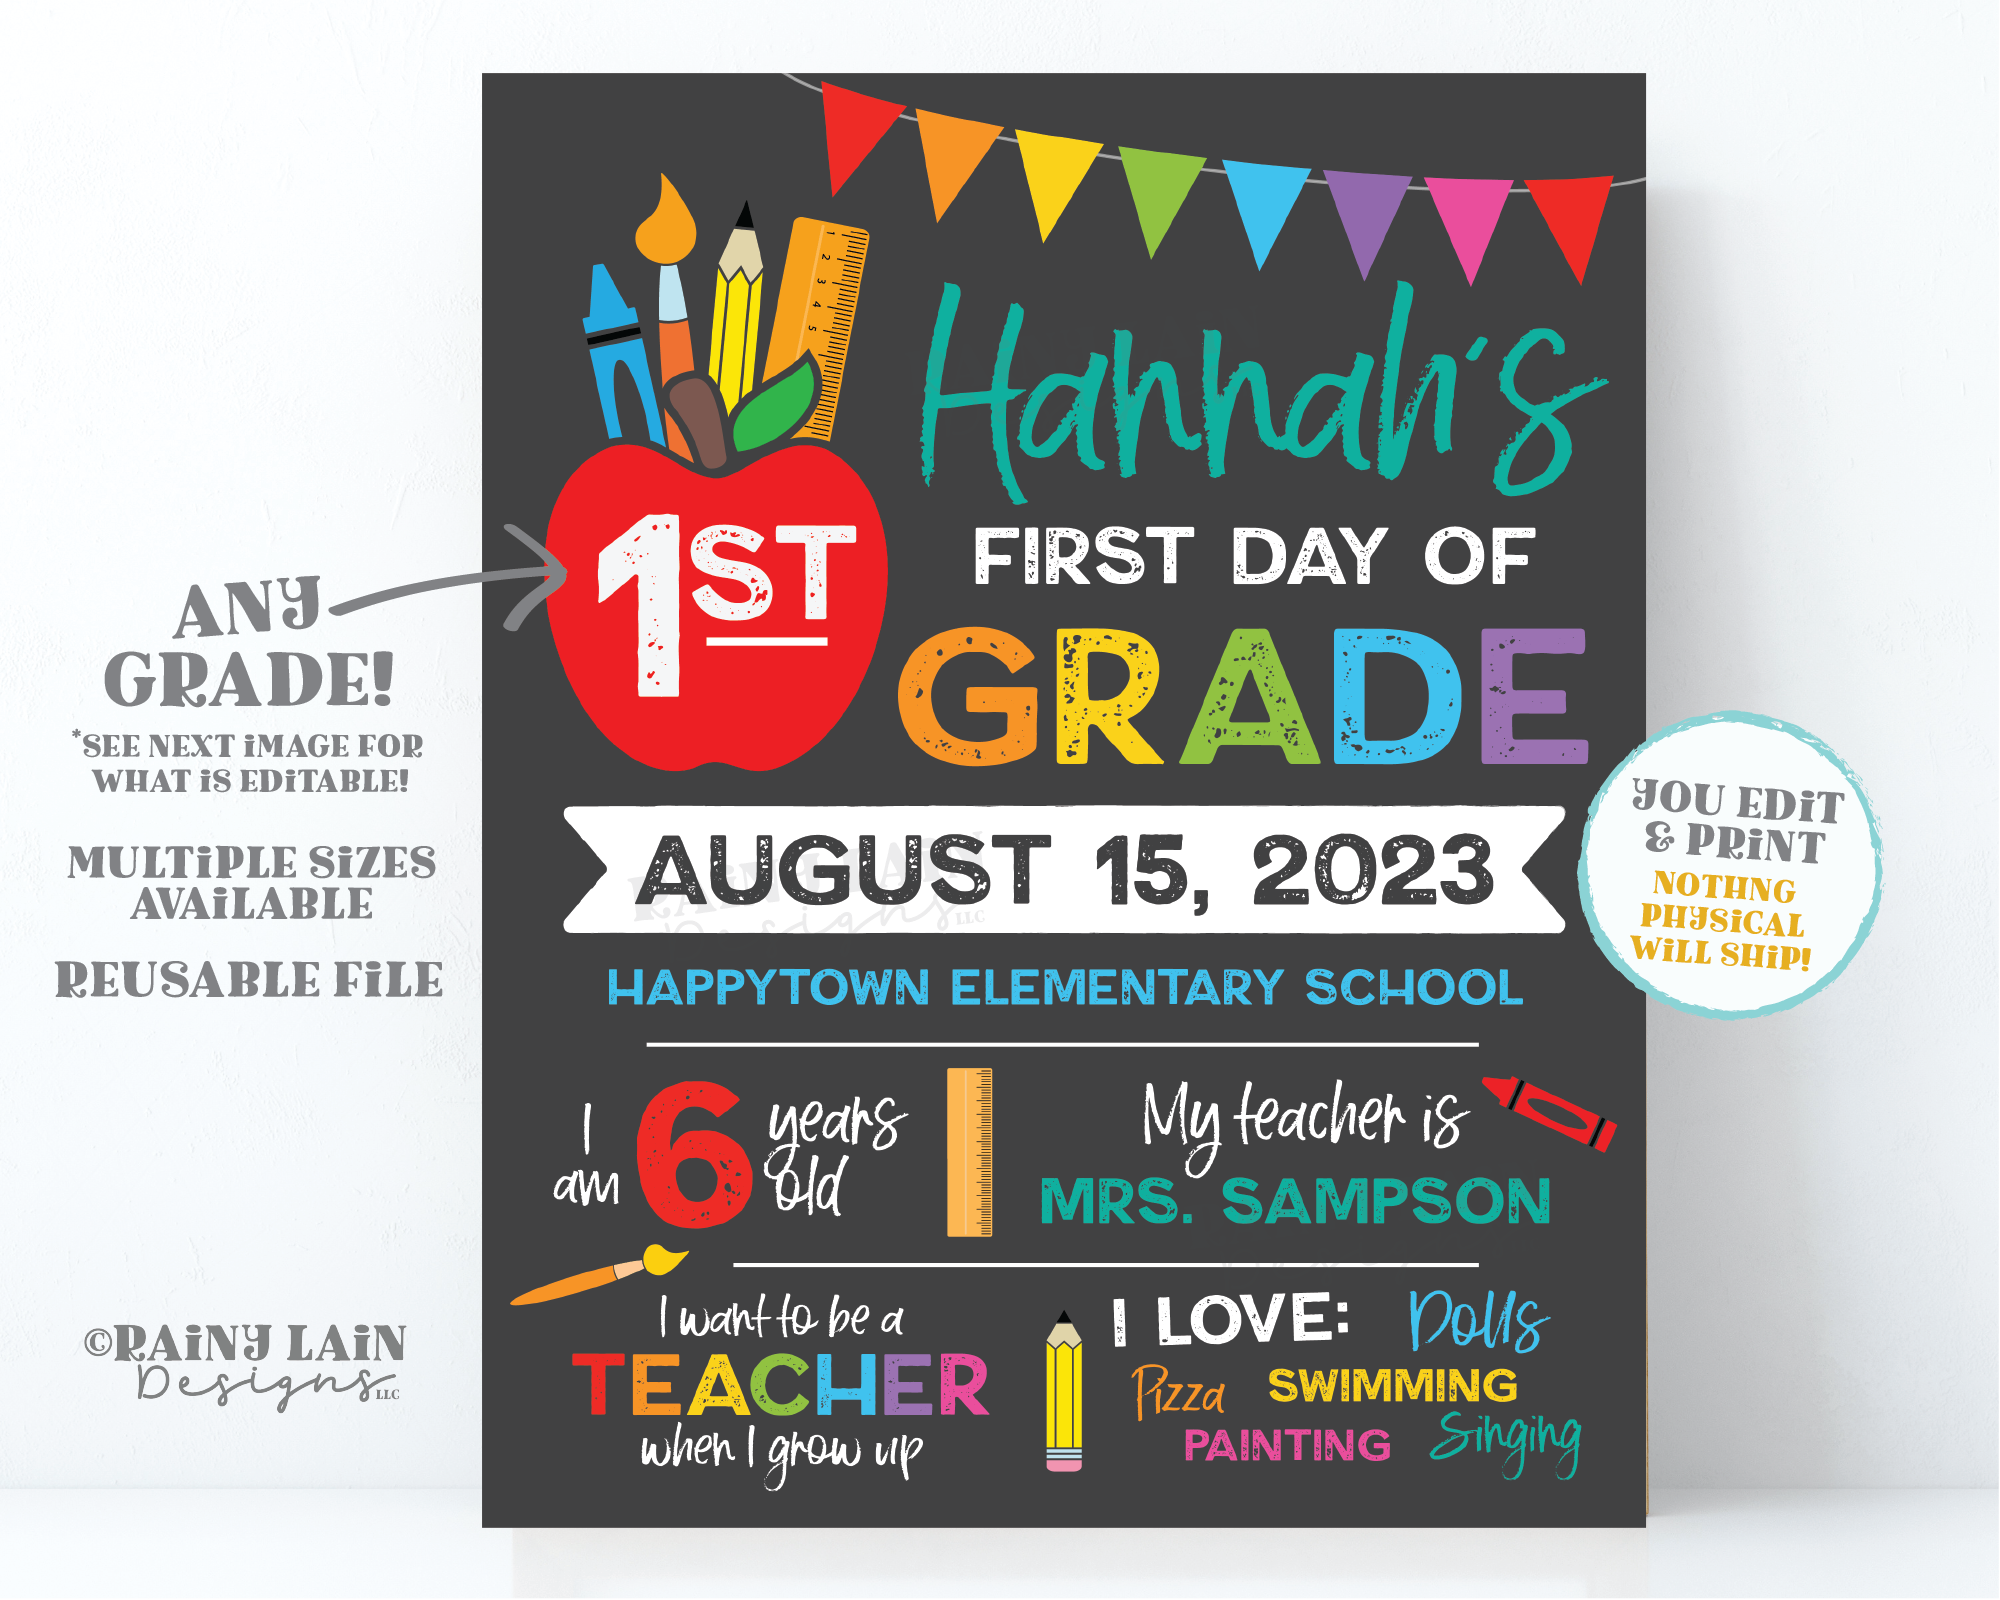 First day of 1st Grade Editable Sign Template Back to School Preschool Kindergarten 2nd 3rd 4th 5th ANY grade Apple Ruler Paint Brush Pencil